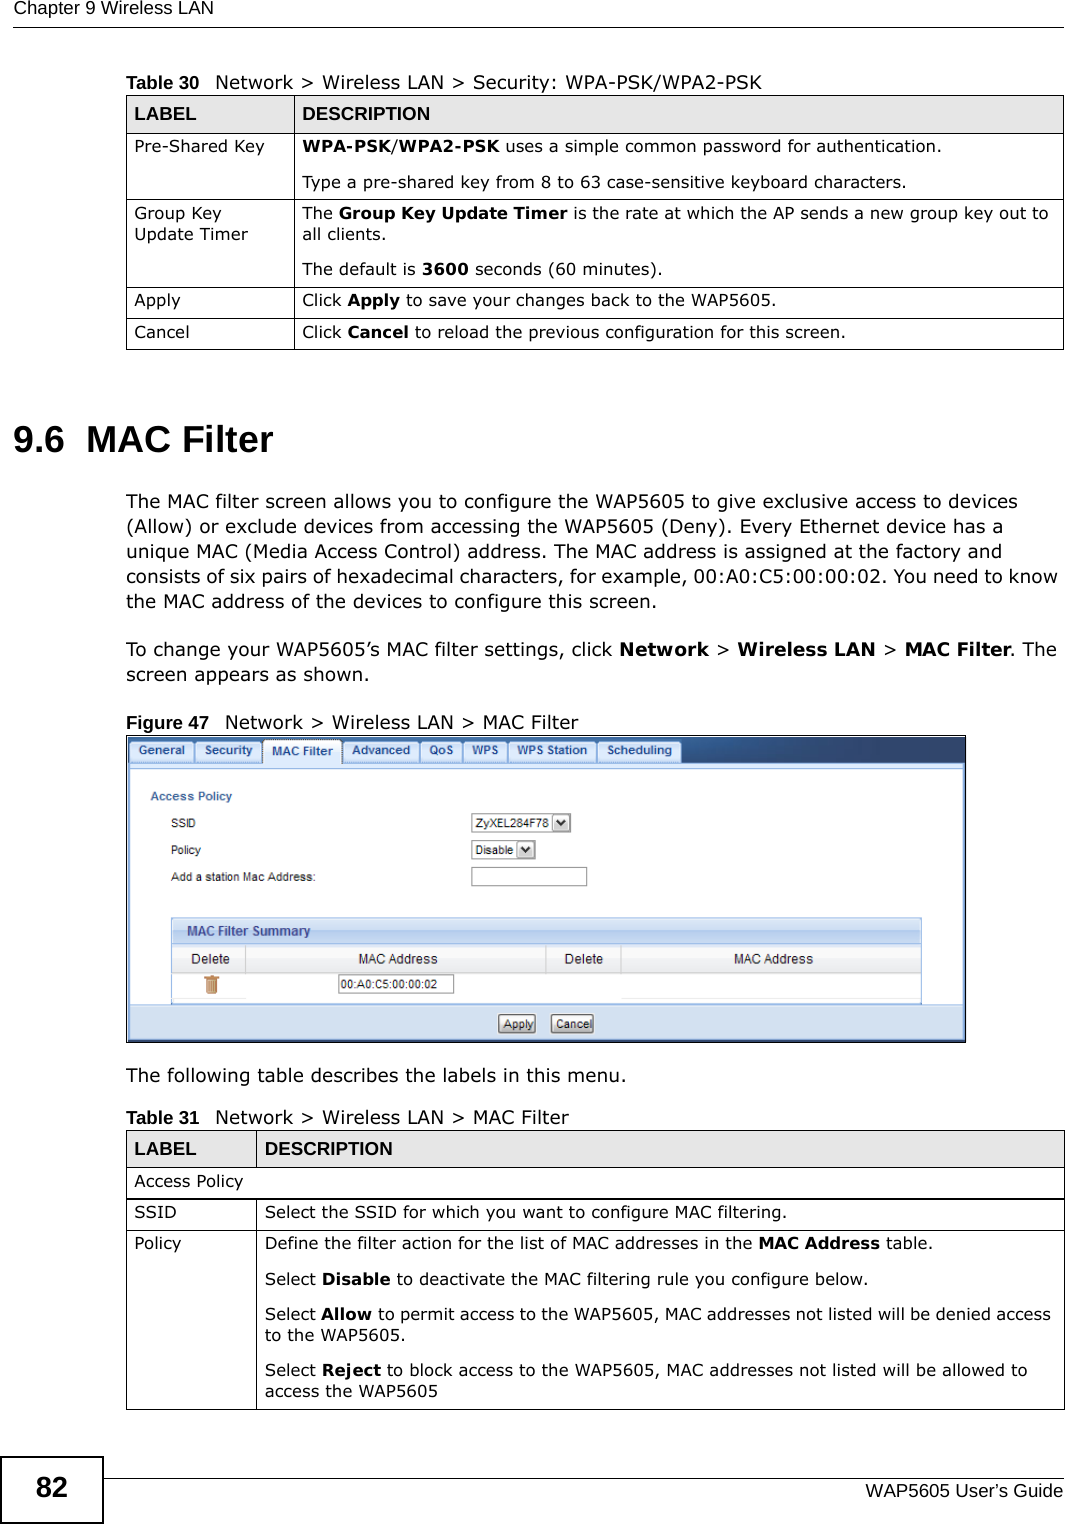 Chapter 9 Wireless LANWAP5605 User’s Guide829.6  MAC Filter   The MAC filter screen allows you to configure the WAP5605 to give exclusive access to devices (Allow) or exclude devices from accessing the WAP5605 (Deny). Every Ethernet device has a unique MAC (Media Access Control) address. The MAC address is assigned at the factory and consists of six pairs of hexadecimal characters, for example, 00:A0:C5:00:00:02. You need to know the MAC address of the devices to configure this screen.To change your WAP5605’s MAC filter settings, click Network &gt; Wireless LAN &gt; MAC Filter. The screen appears as shown.Figure 47   Network &gt; Wireless LAN &gt; MAC FilterThe following table describes the labels in this menu.Pre-Shared Key  WPA-PSK/WPA2-PSK uses a simple common password for authentication.Type a pre-shared key from 8 to 63 case-sensitive keyboard characters.Group Key Update TimerThe Group Key Update Timer is the rate at which the AP sends a new group key out to all clients. The default is 3600 seconds (60 minutes).Apply Click Apply to save your changes back to the WAP5605.Cancel Click Cancel to reload the previous configuration for this screen.Table 30   Network &gt; Wireless LAN &gt; Security: WPA-PSK/WPA2-PSKLABEL DESCRIPTIONTable 31   Network &gt; Wireless LAN &gt; MAC FilterLABEL DESCRIPTIONAccess PolicySSID Select the SSID for which you want to configure MAC filtering.Policy  Define the filter action for the list of MAC addresses in the MAC Address table. Select Disable to deactivate the MAC filtering rule you configure below.Select Allow to permit access to the WAP5605, MAC addresses not listed will be denied access to the WAP5605. Select Reject to block access to the WAP5605, MAC addresses not listed will be allowed to access the WAP5605 